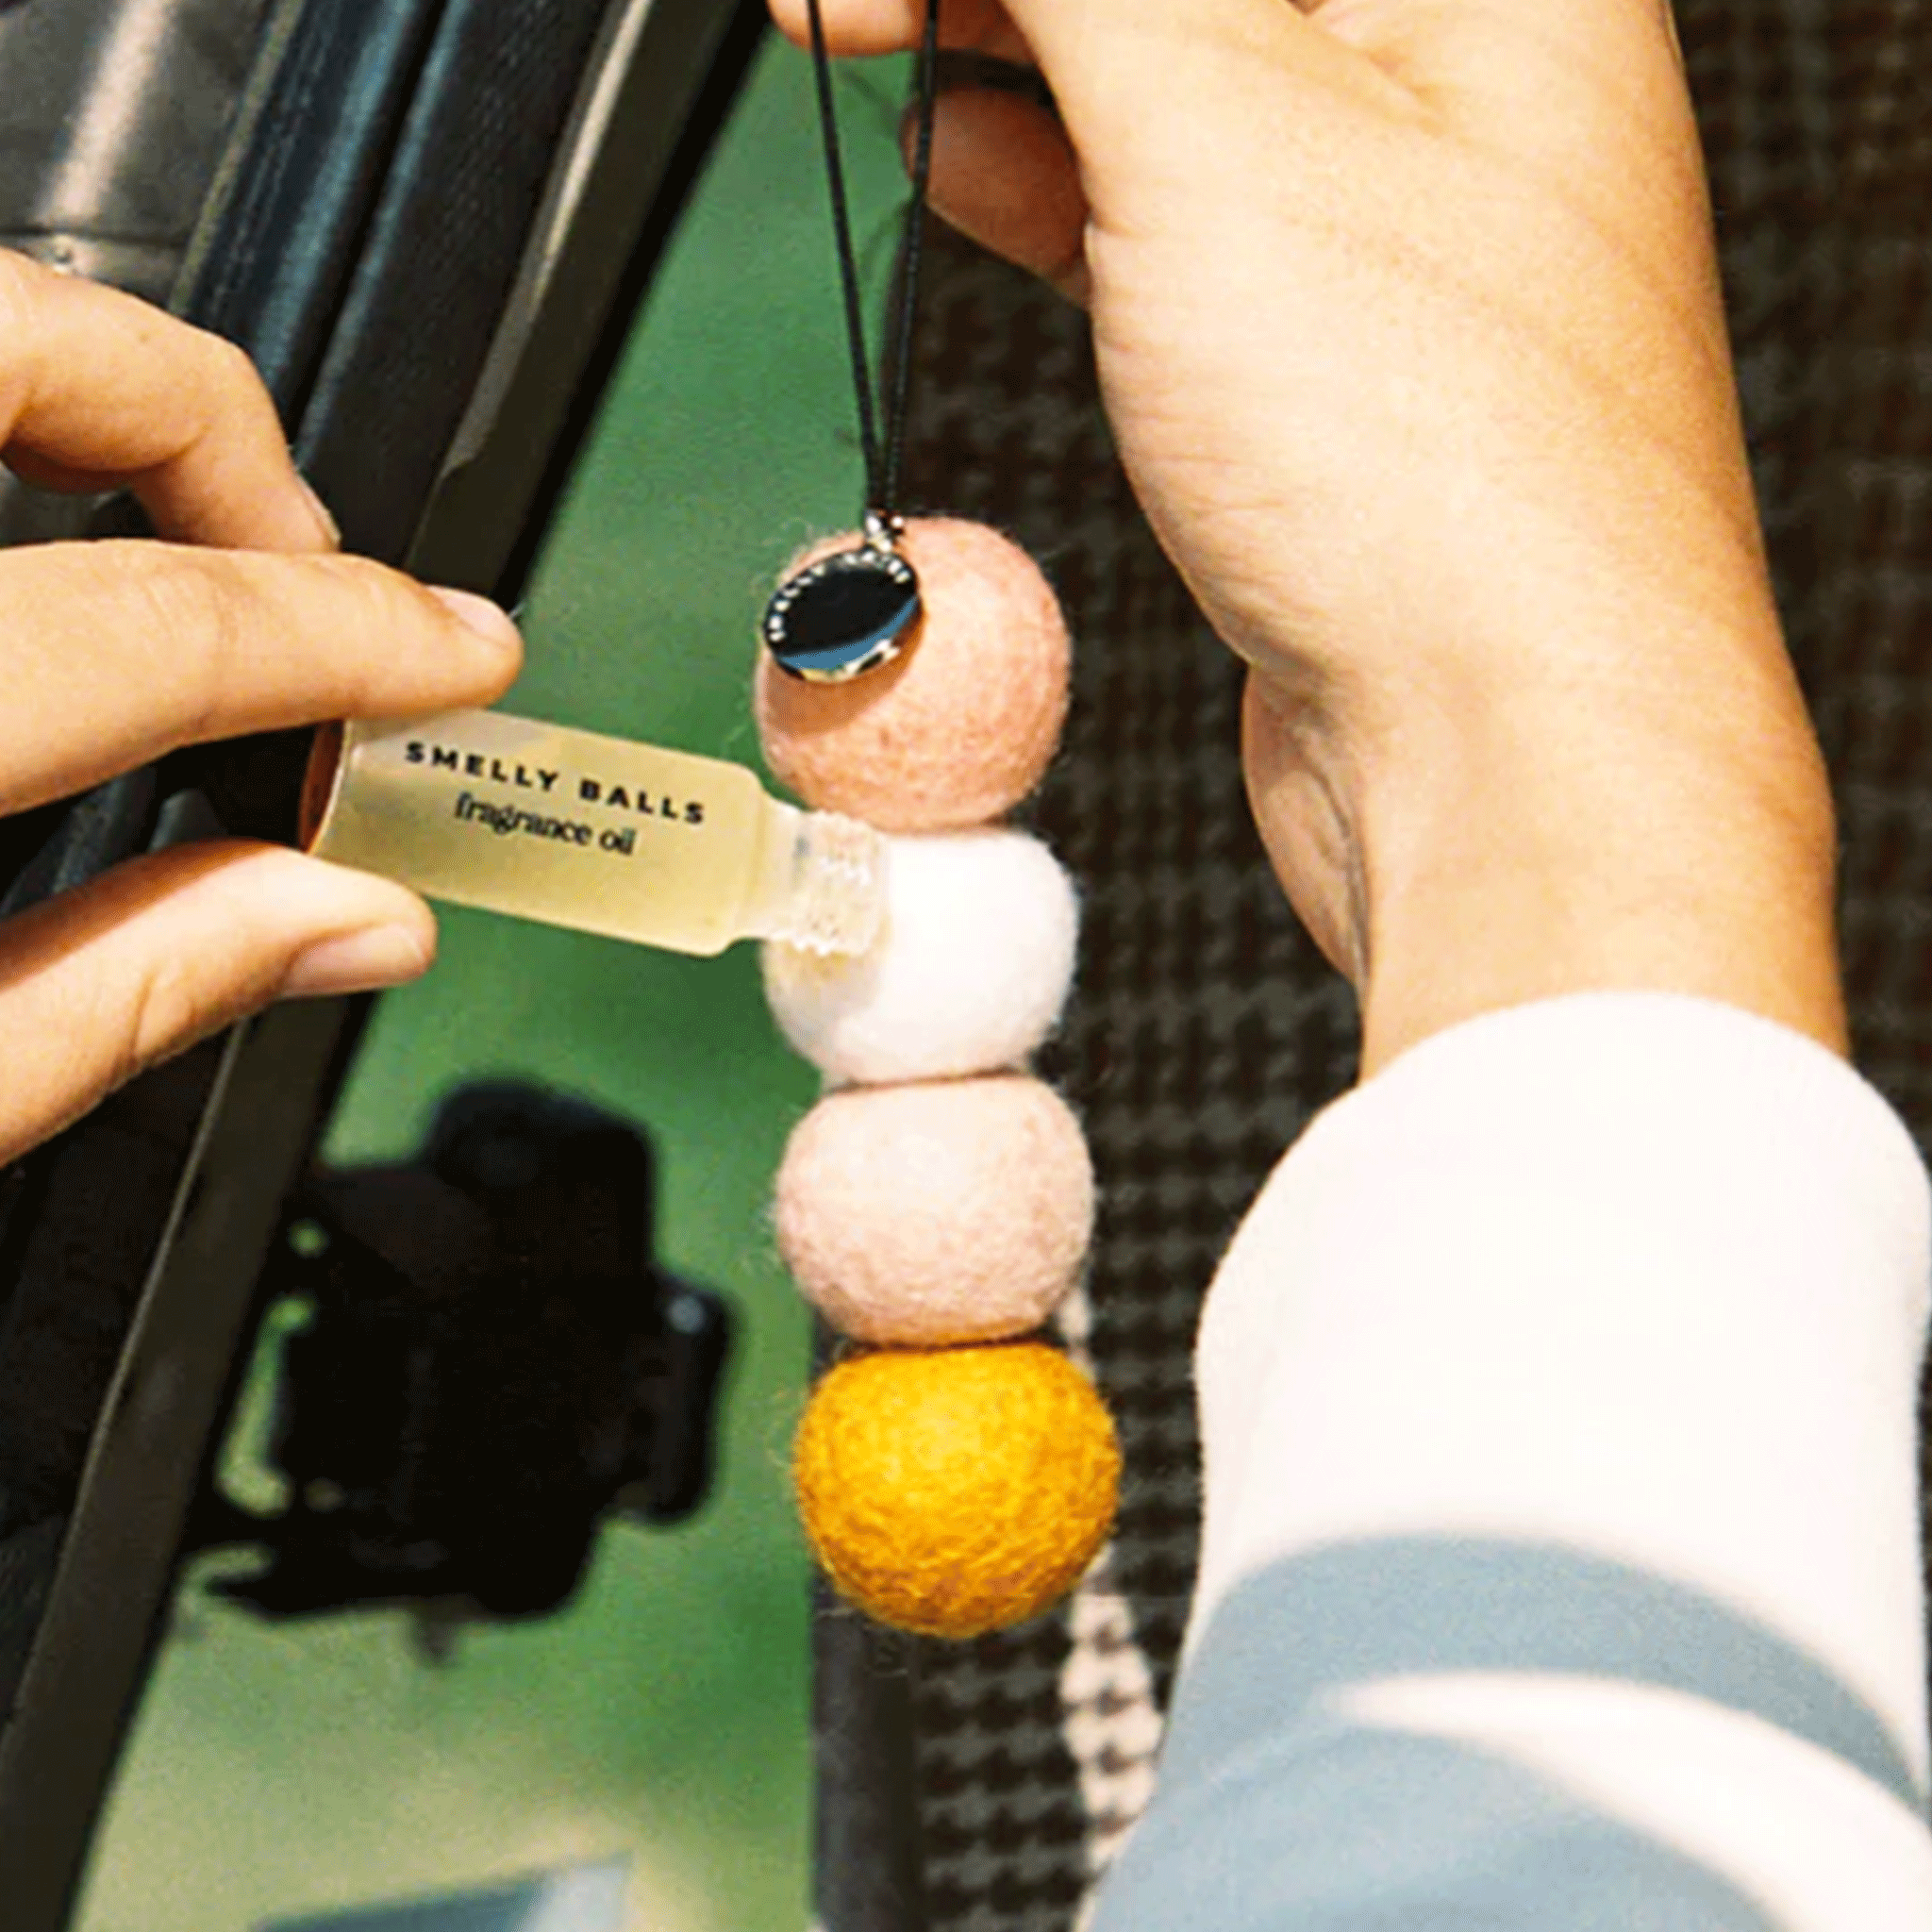 A model holding the four small wool balls made into an air freshener with a small bottle of fragrance oil next to it.